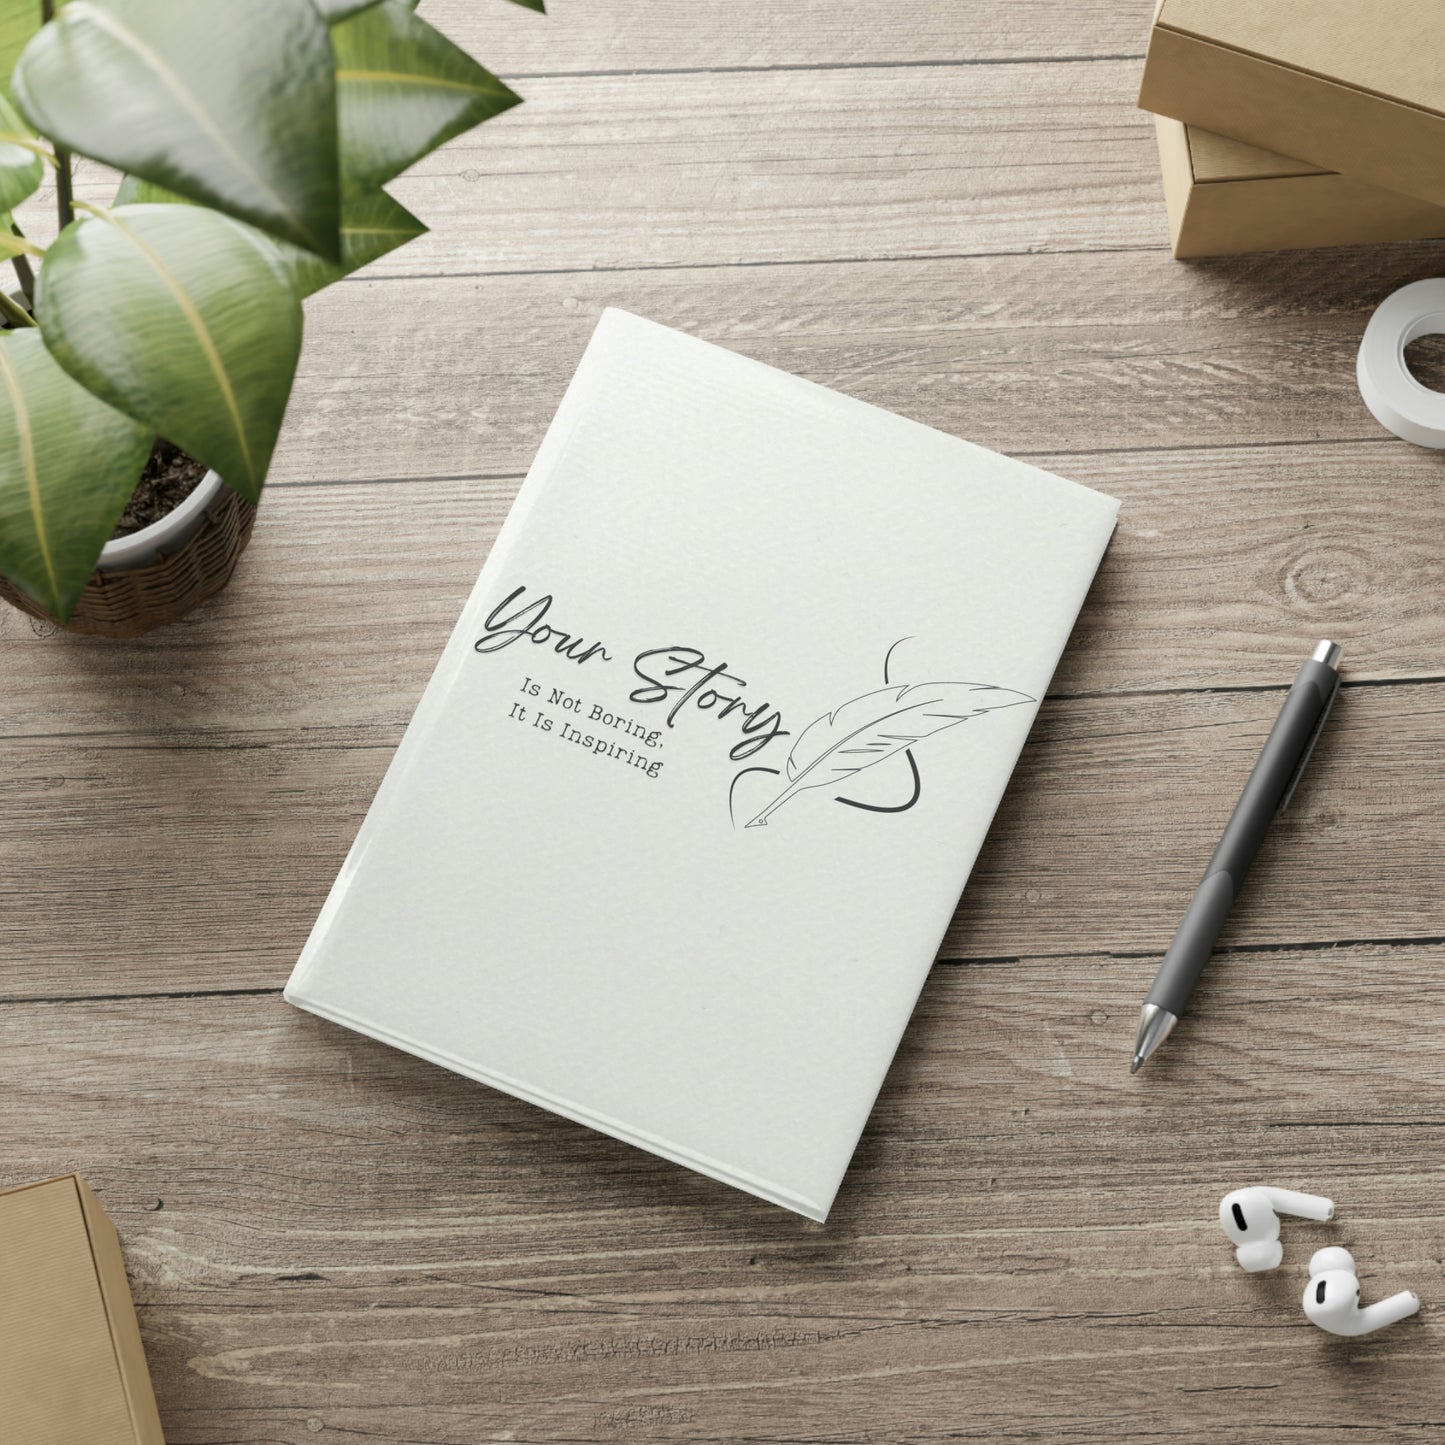 Hardcover Notebook with Puffy Covers // Your story is not boring // Write Out Loud